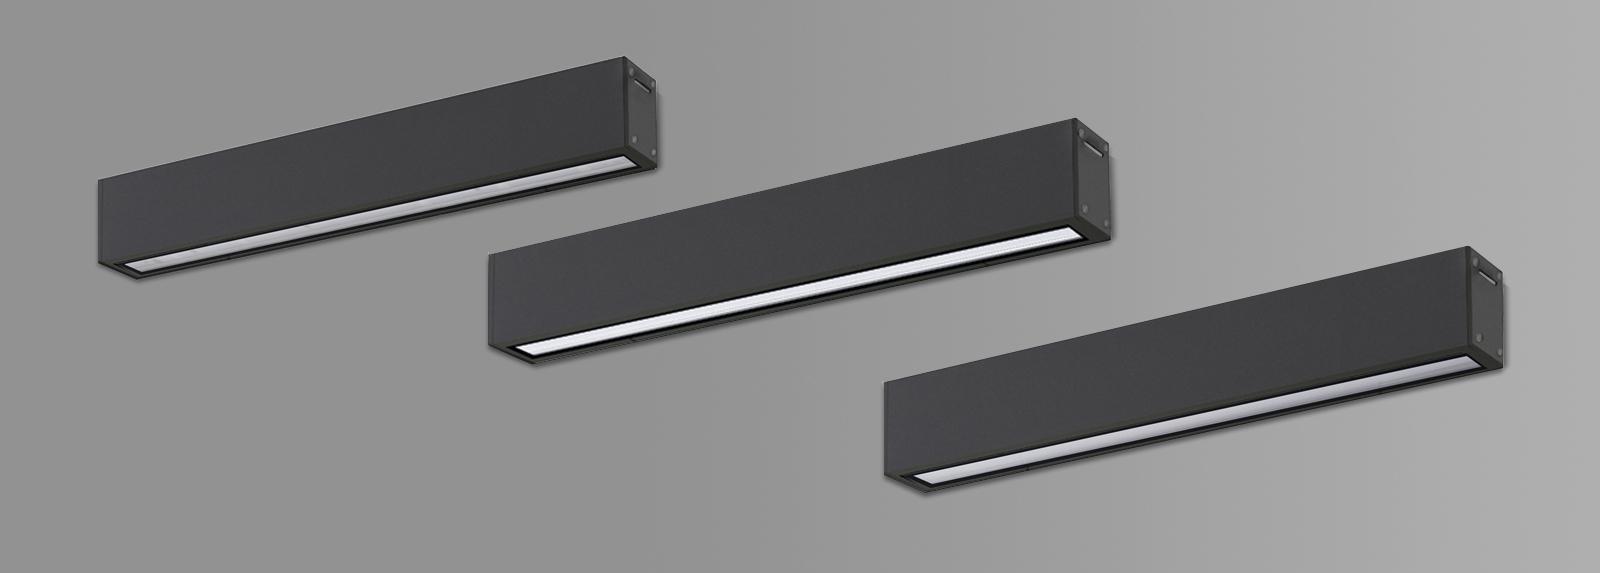 DISTRICT 600 | IP66 Wall-mounted linear  luminaires